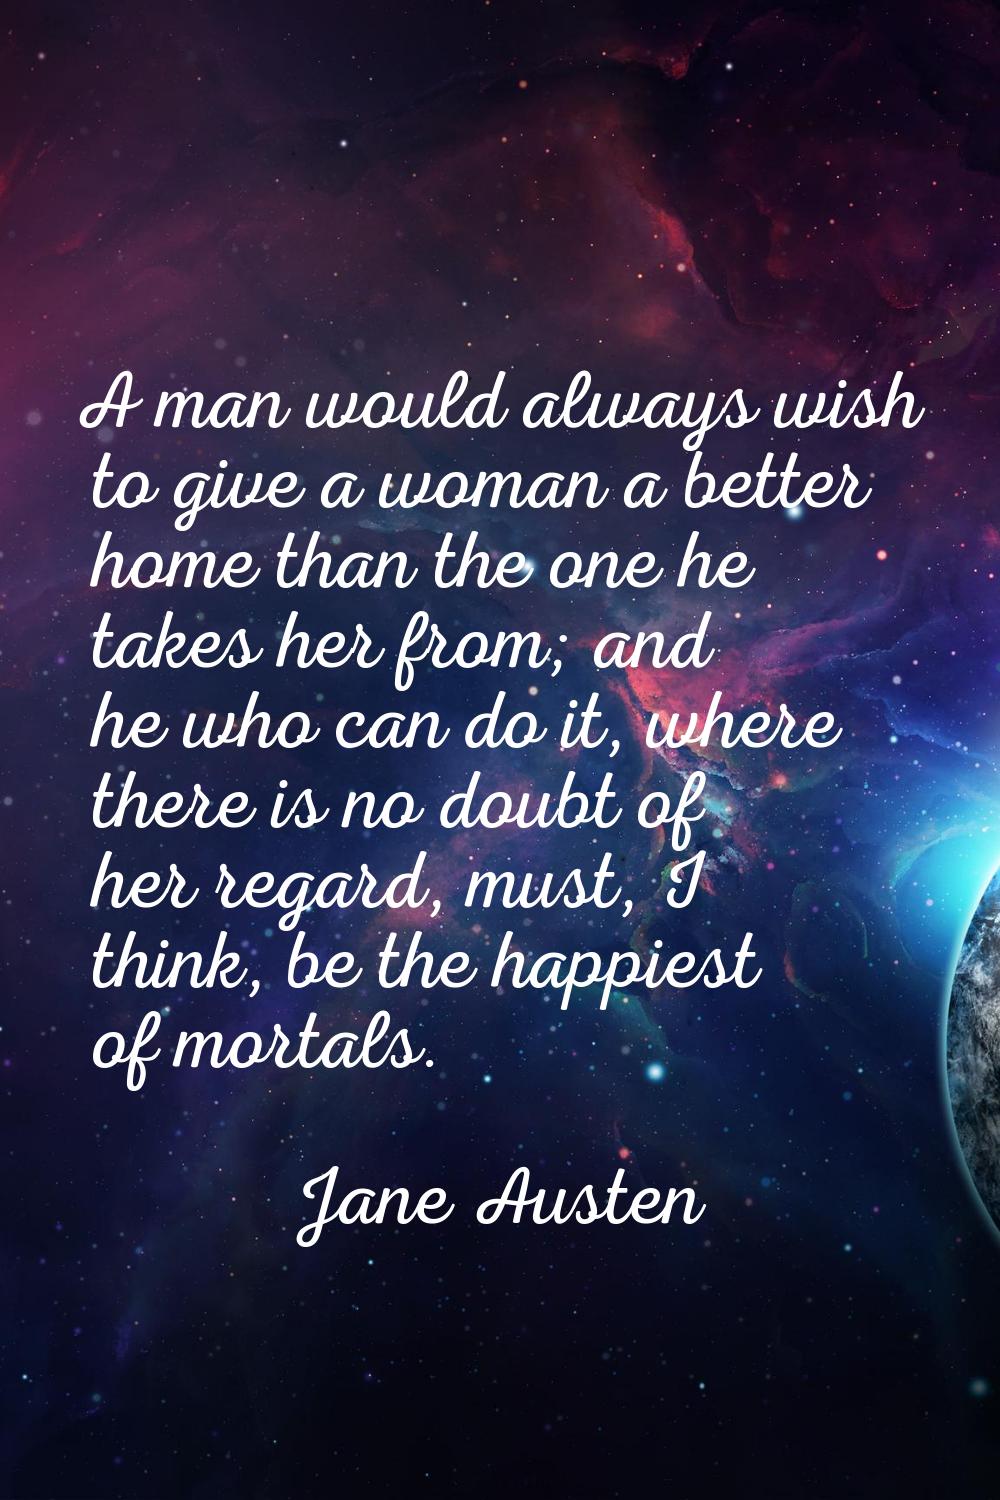 A man would always wish to give a woman a better home than the one he takes her from; and he who ca